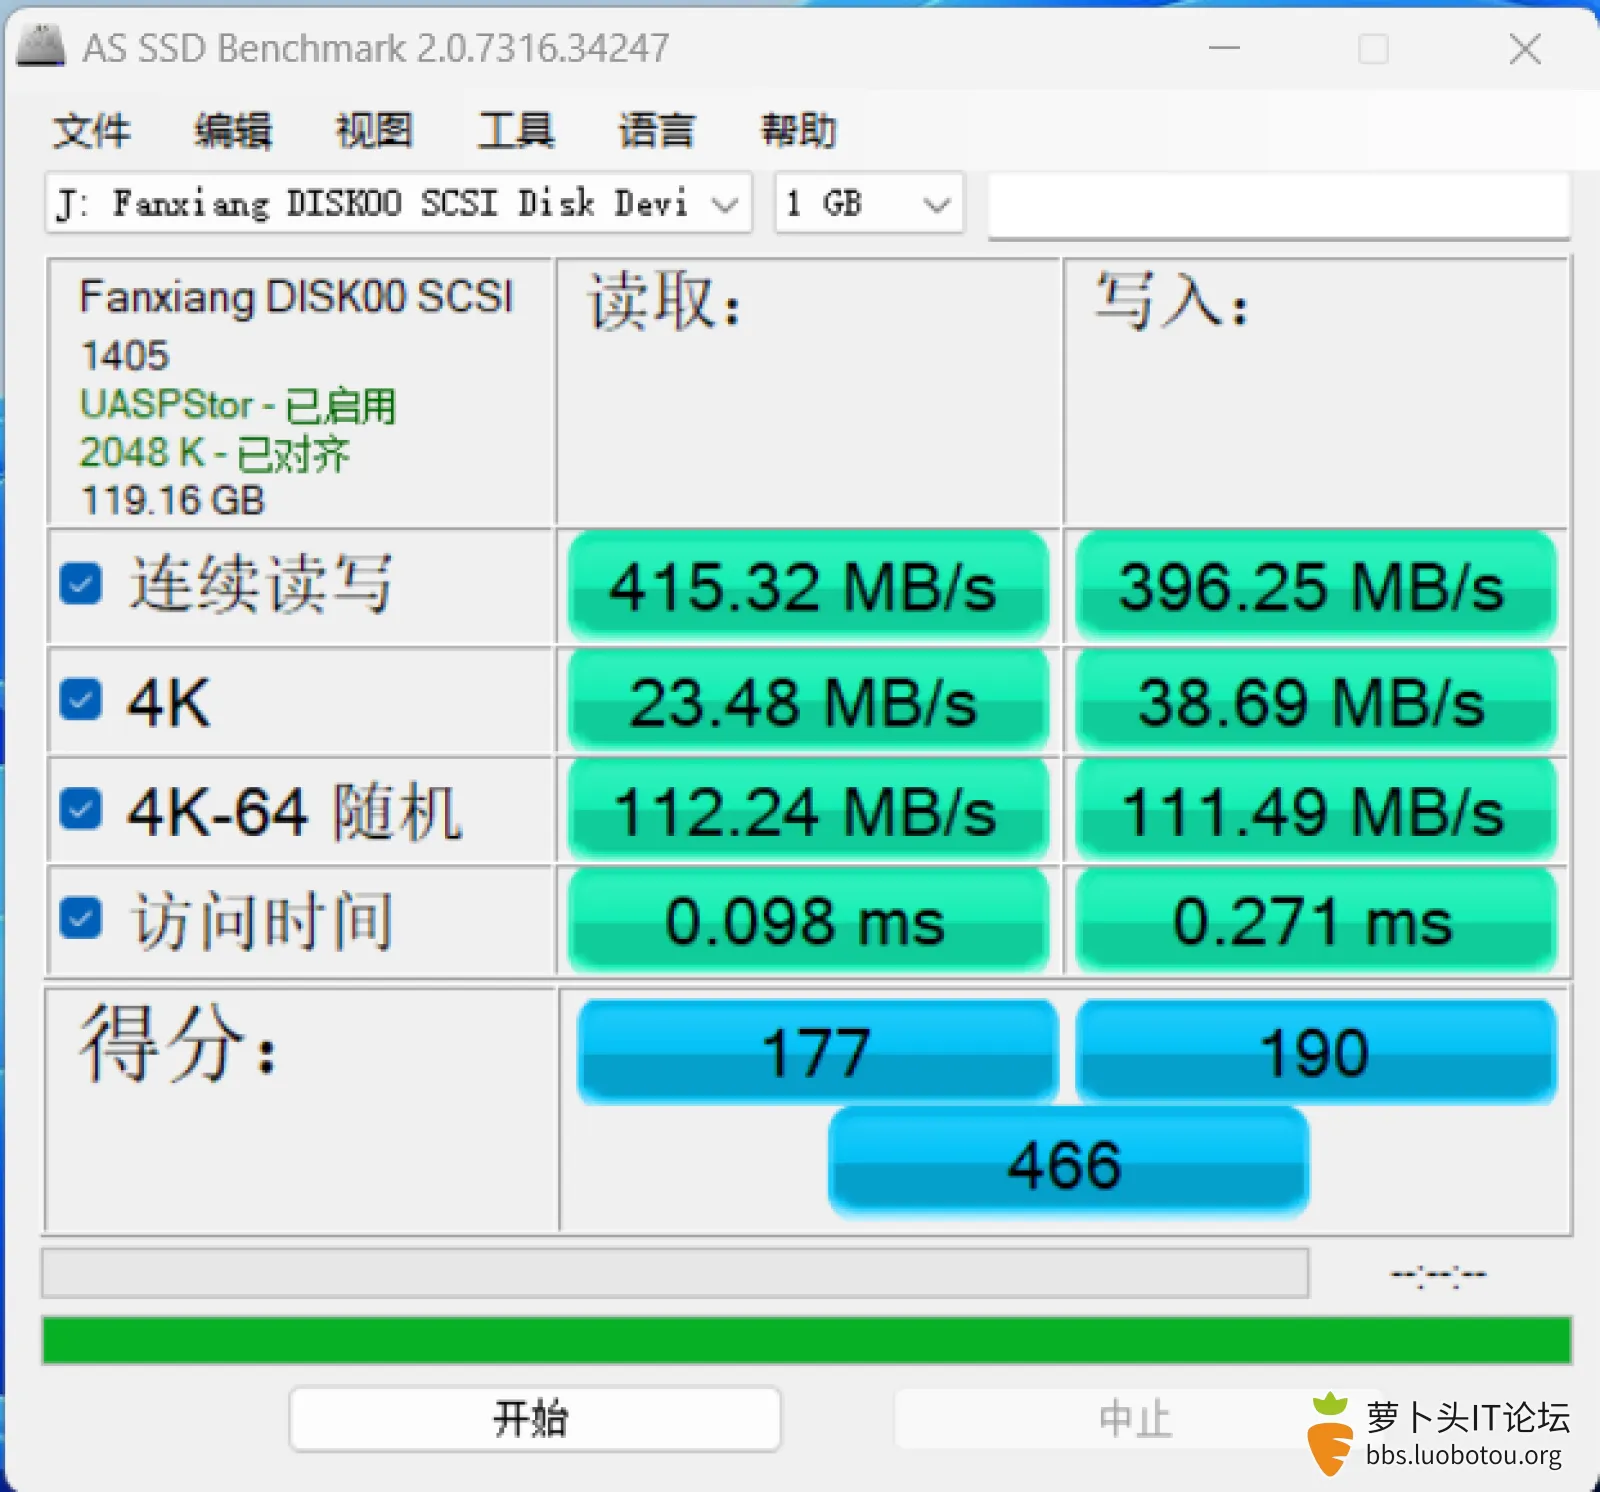 AS SSD Benchmark 测试